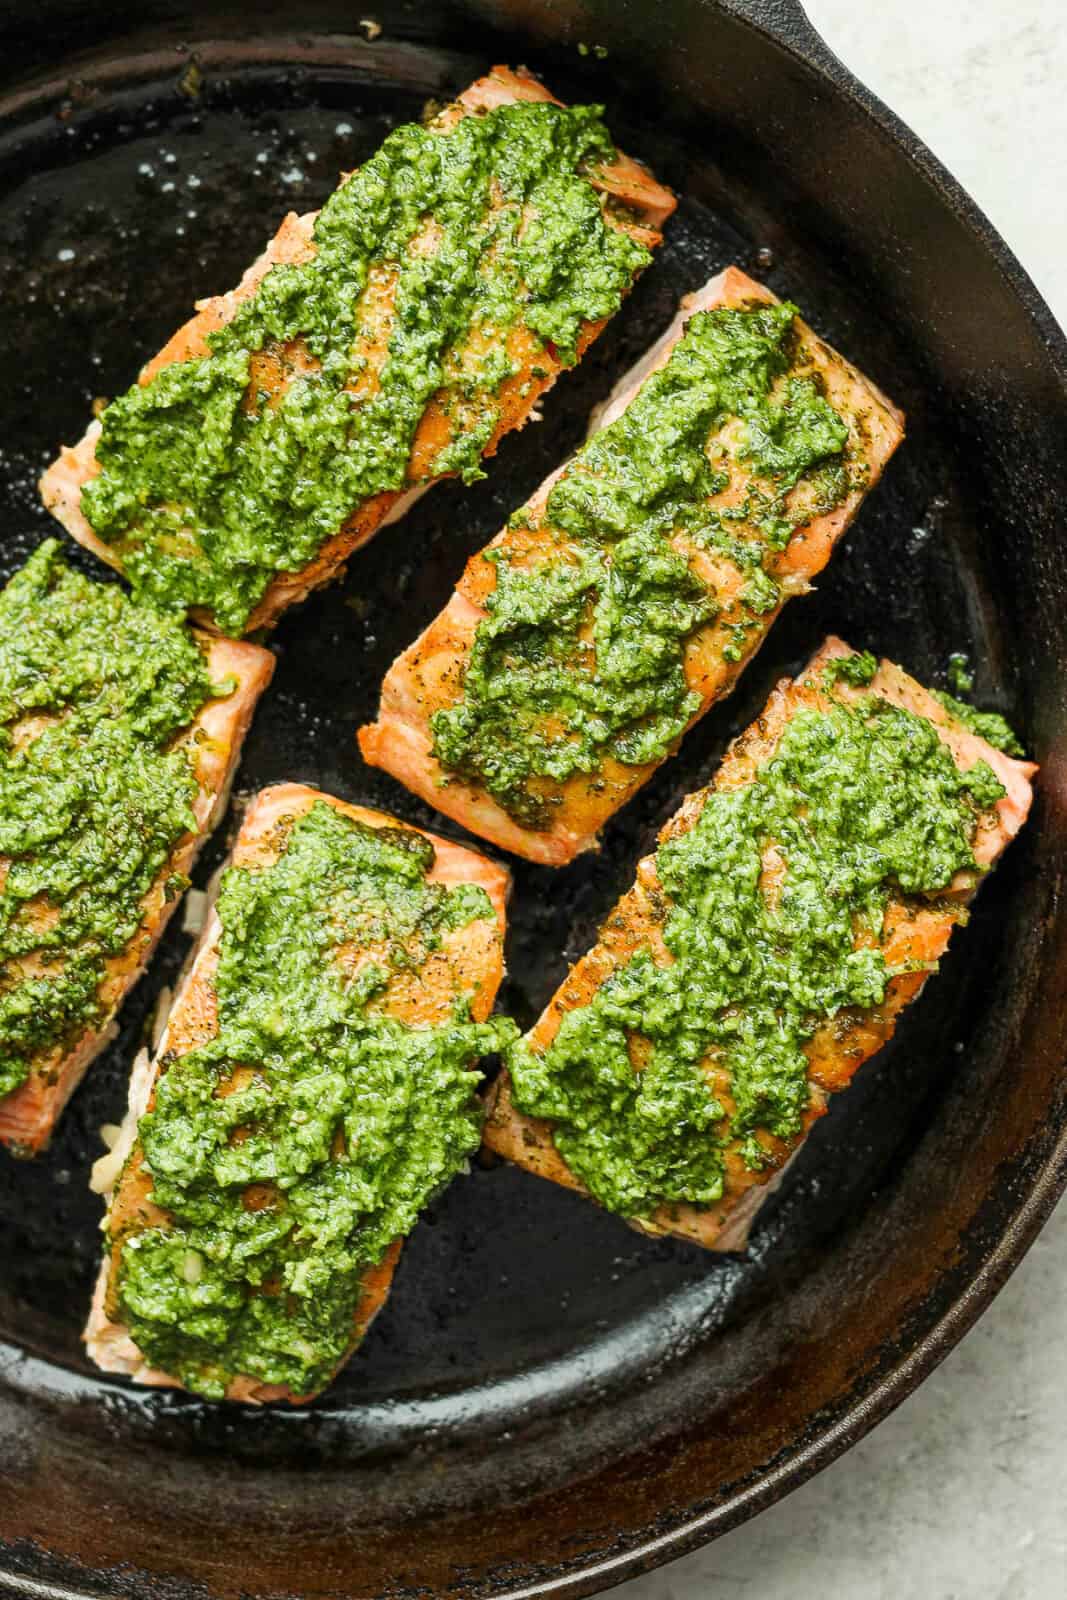 Pesto salmon fillets in a cast iron skillet with more pesto added on top.